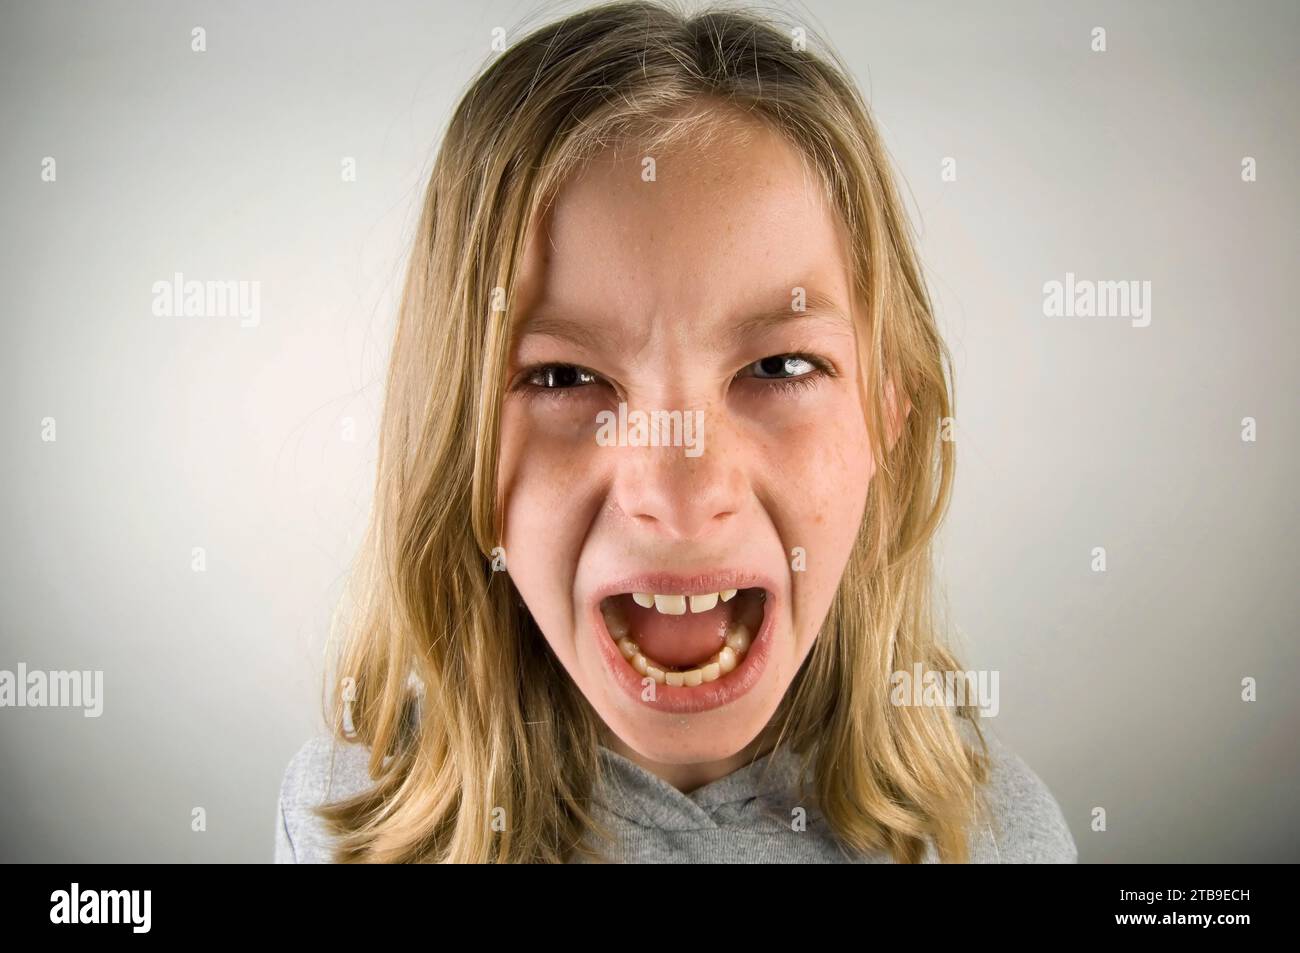 Preteen girl with an angry expression against a grey background; Studio Stock Photo